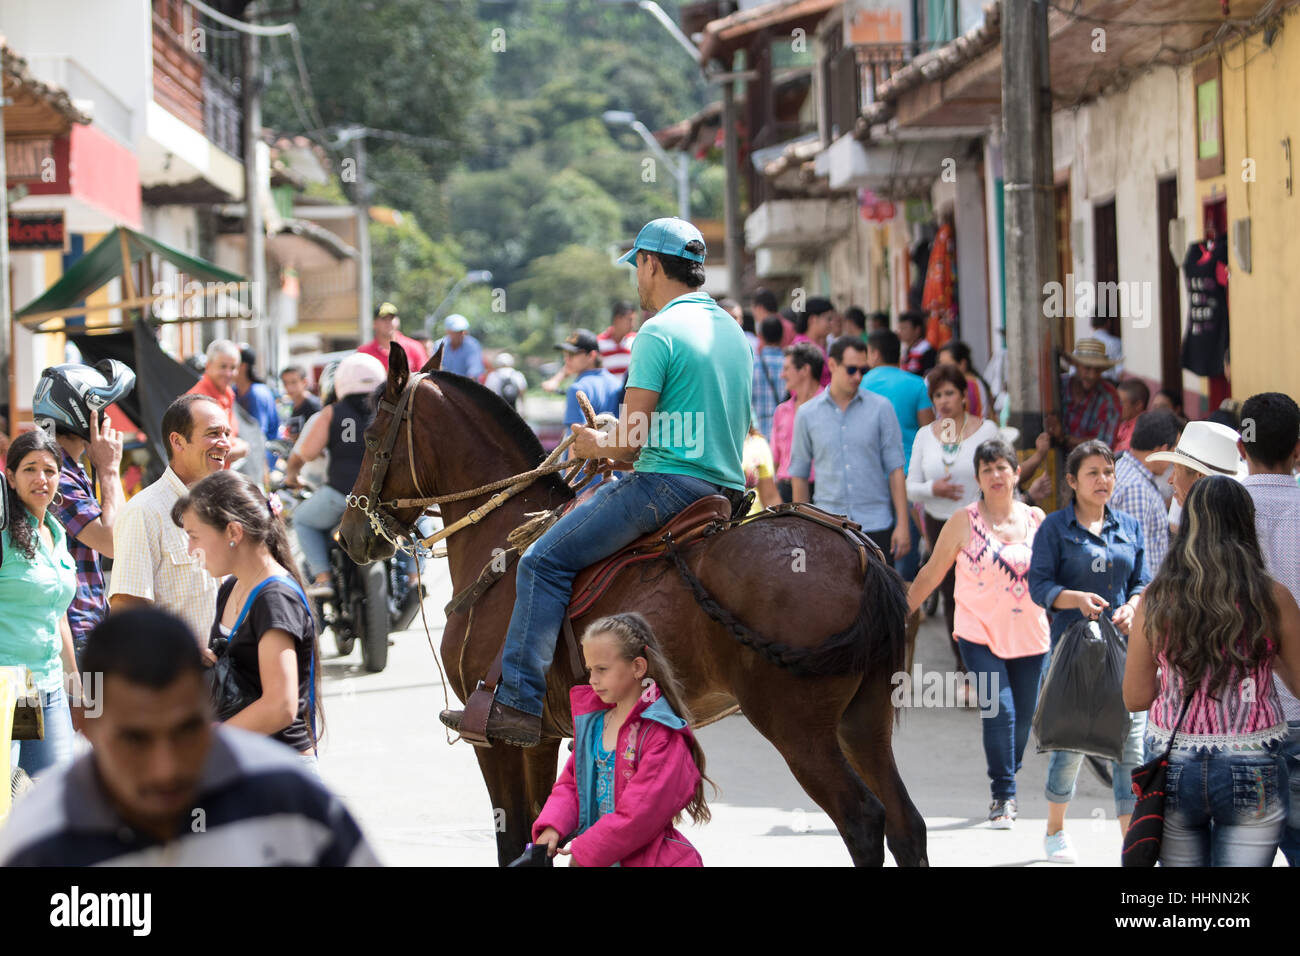 October 2, 2016, El Jardin, Colombia: a local man rides his horse through the crowded street of the coffee producing colonial town Stock Photo